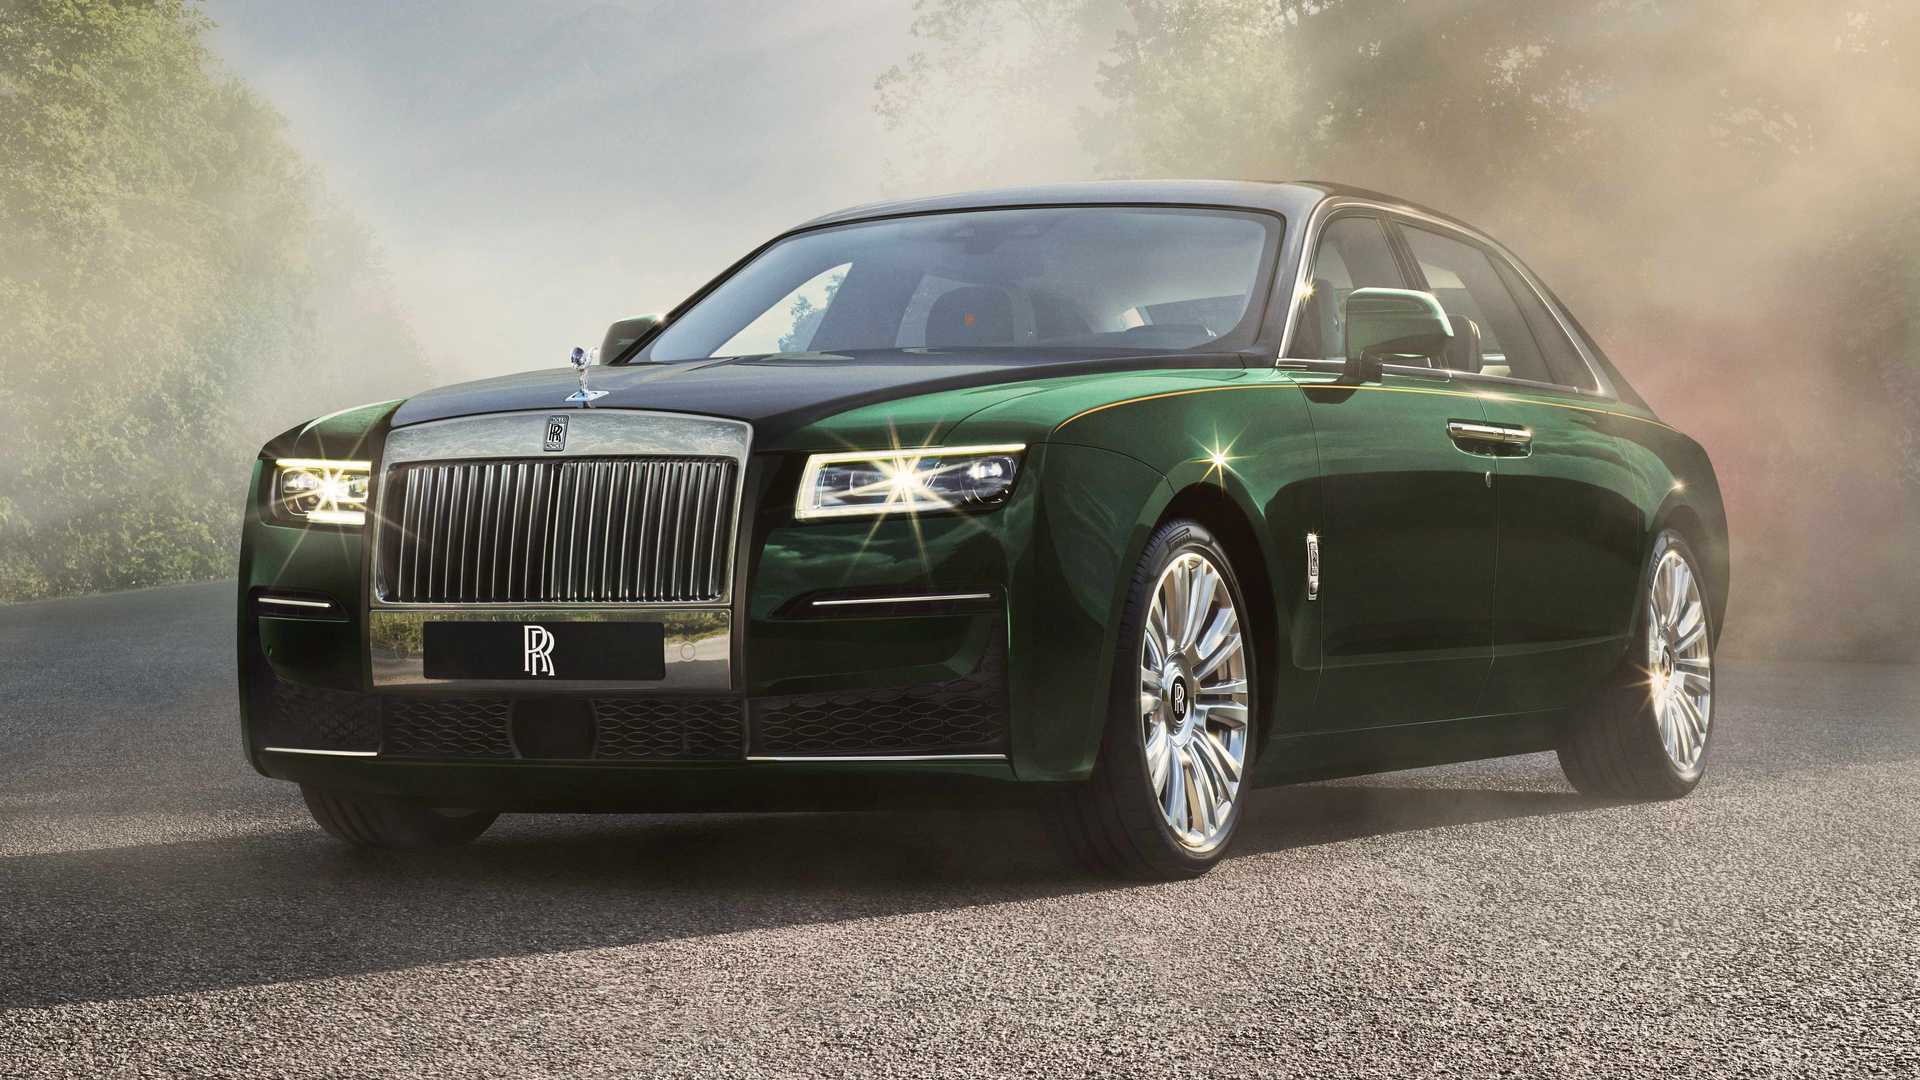 Sinister RollsRoyce Black Badge Wraith Tuned To Over 700 HP